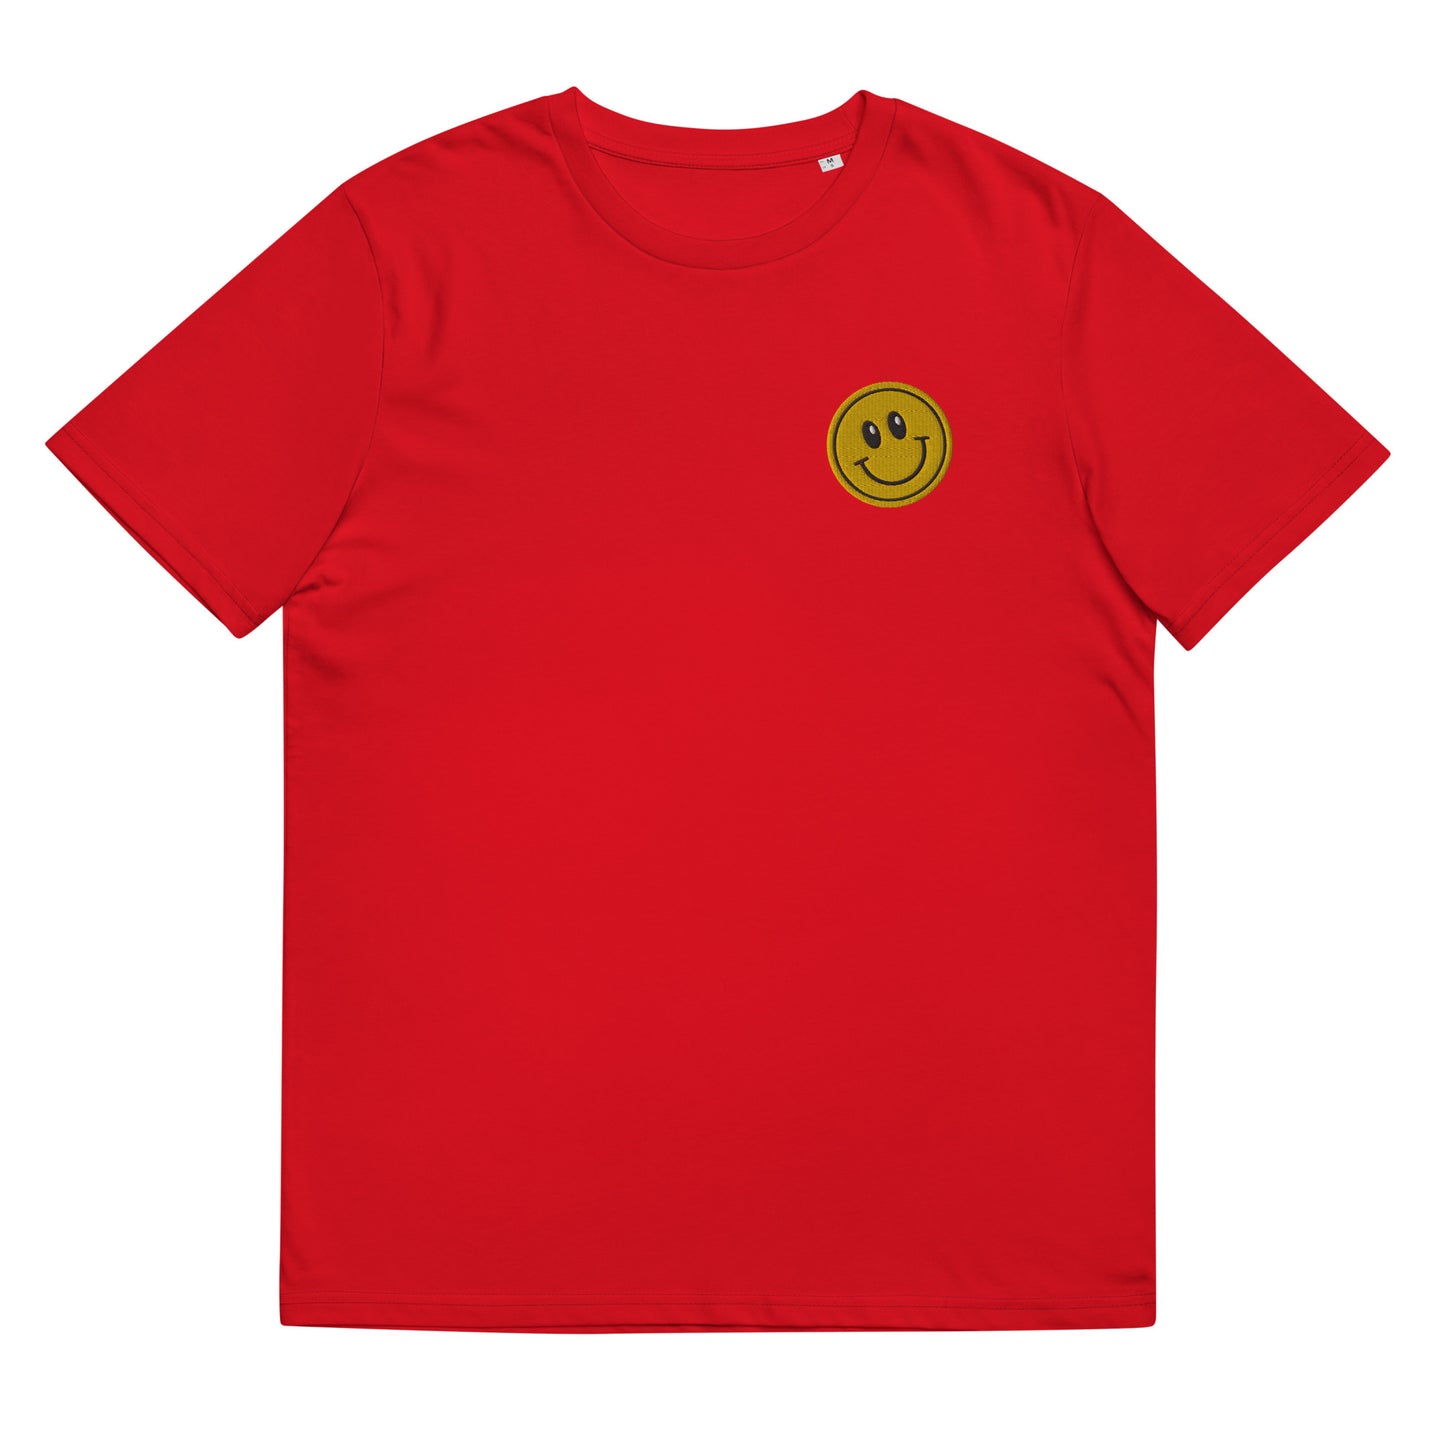 Classic Smiley Embroidered Unisex organic cotton t-shirt